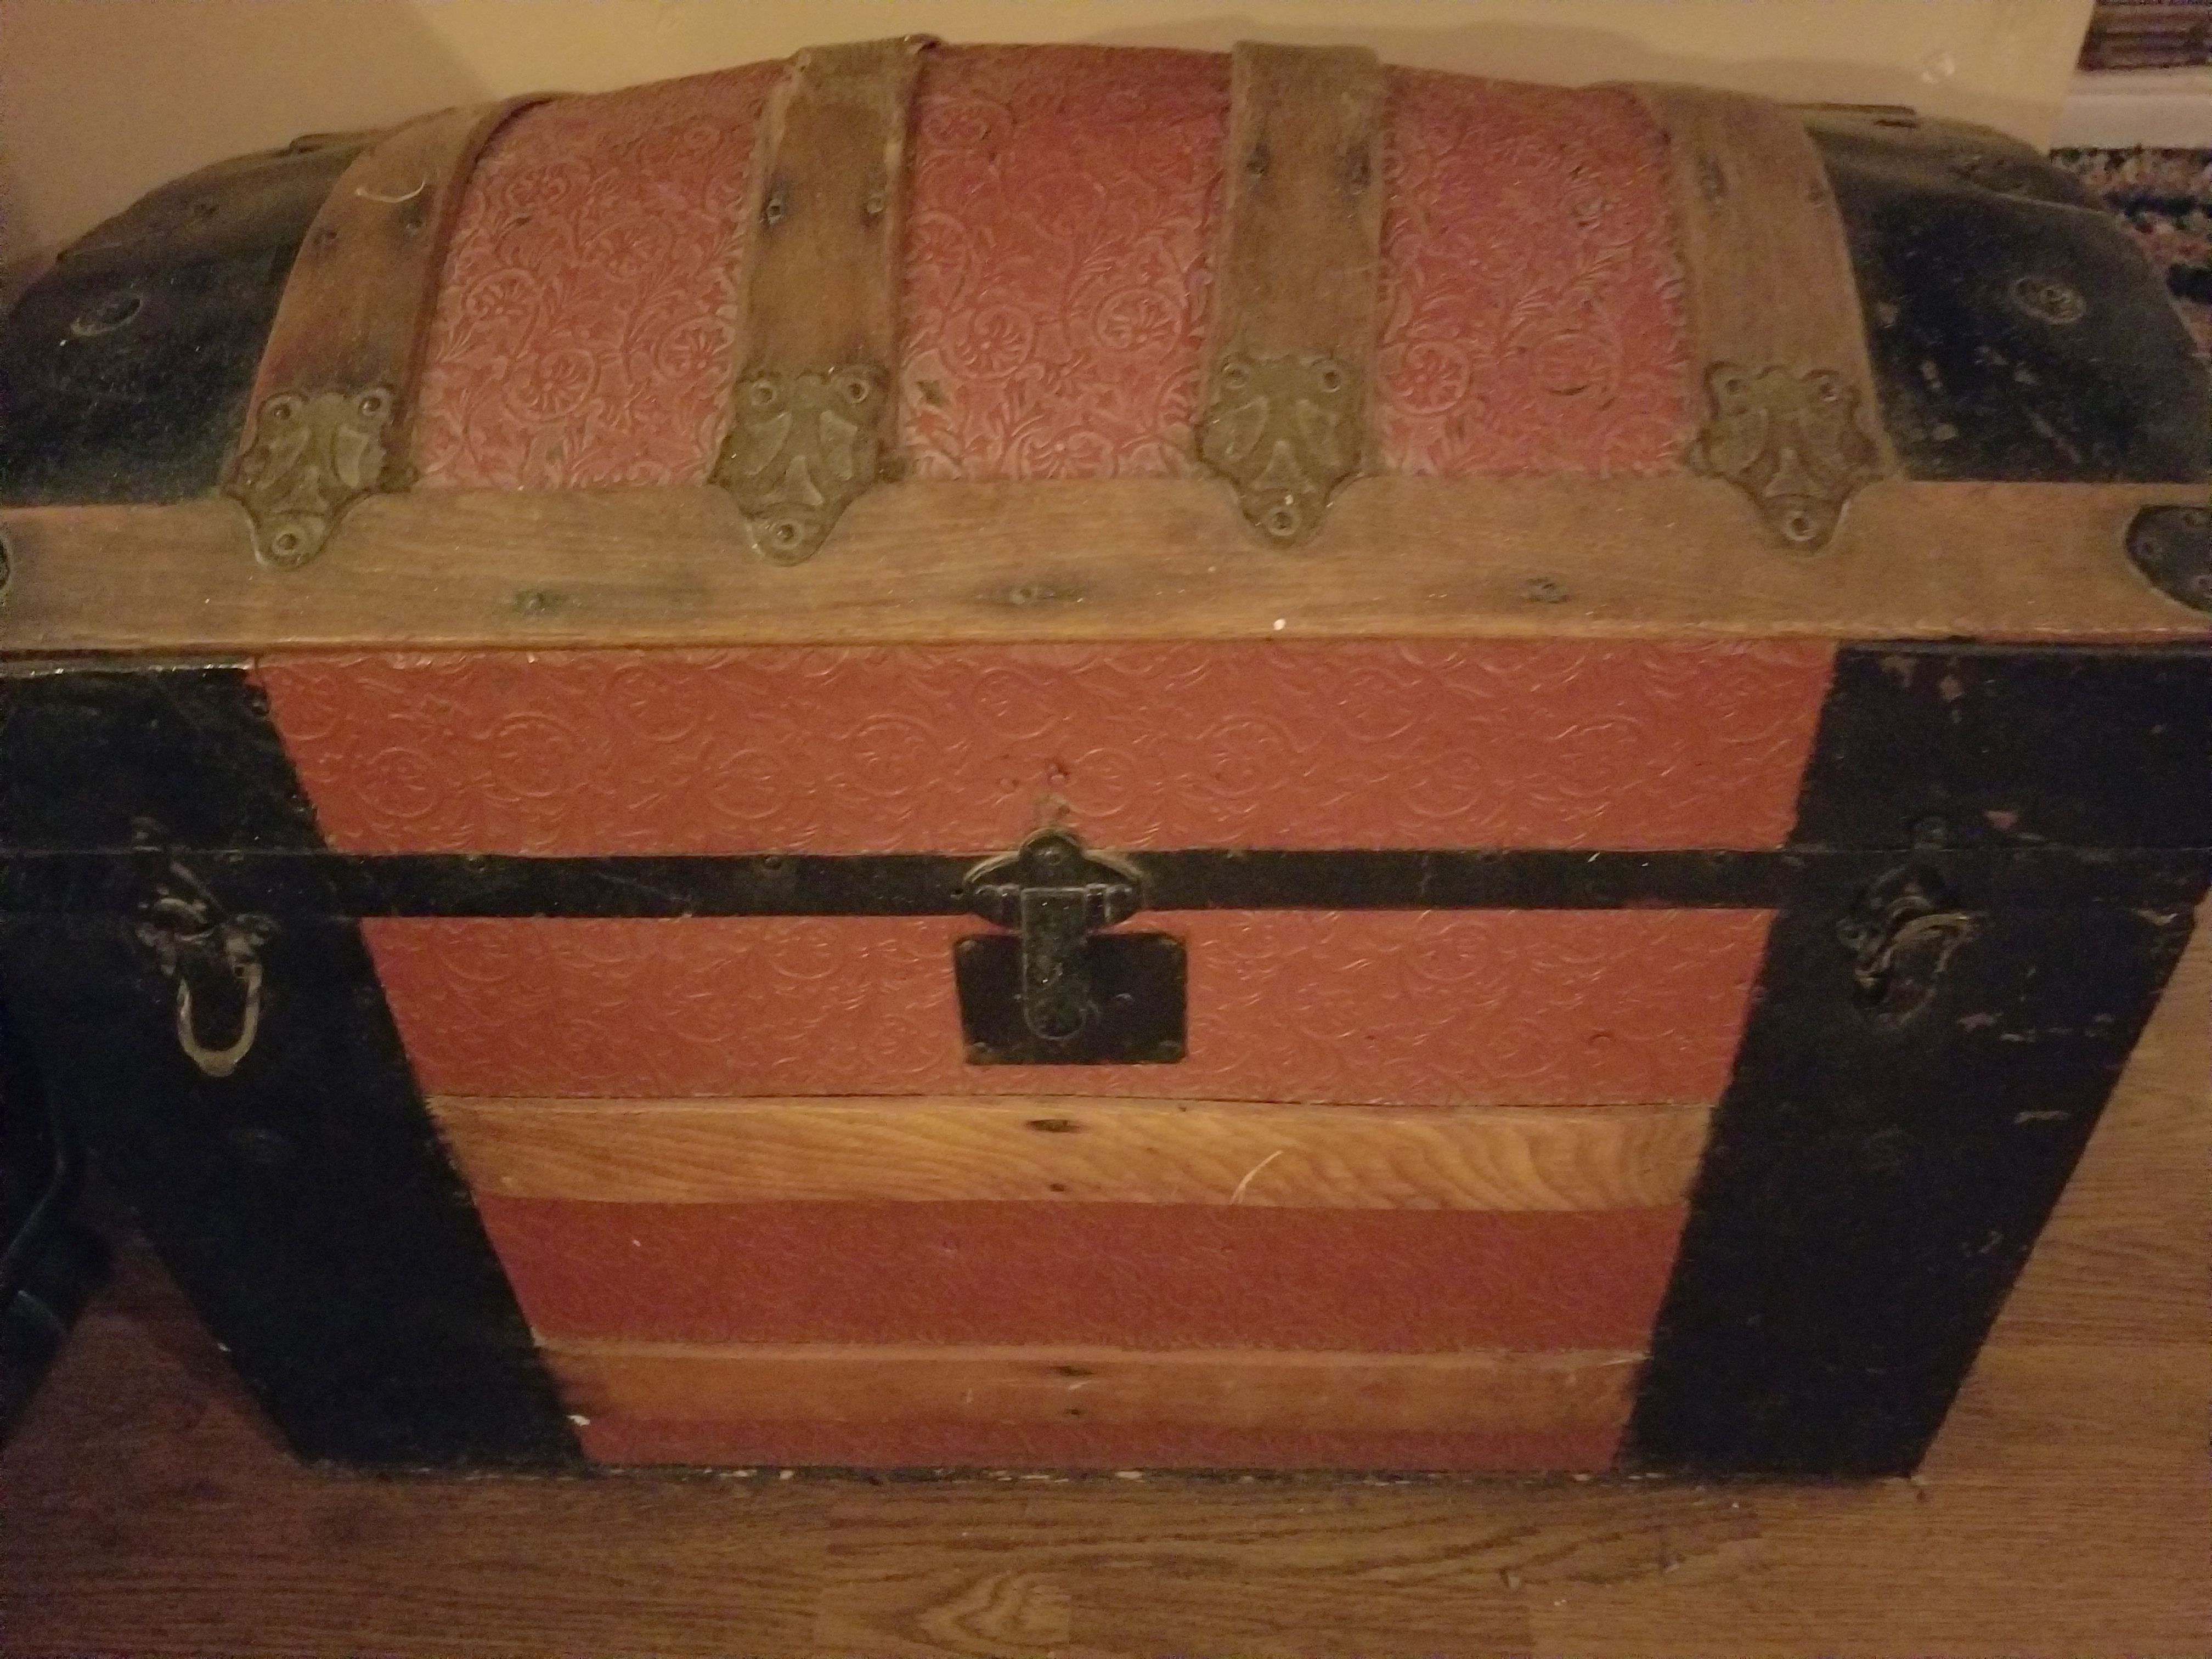 The trunk Elder Abbott took with him on his mission to NZ